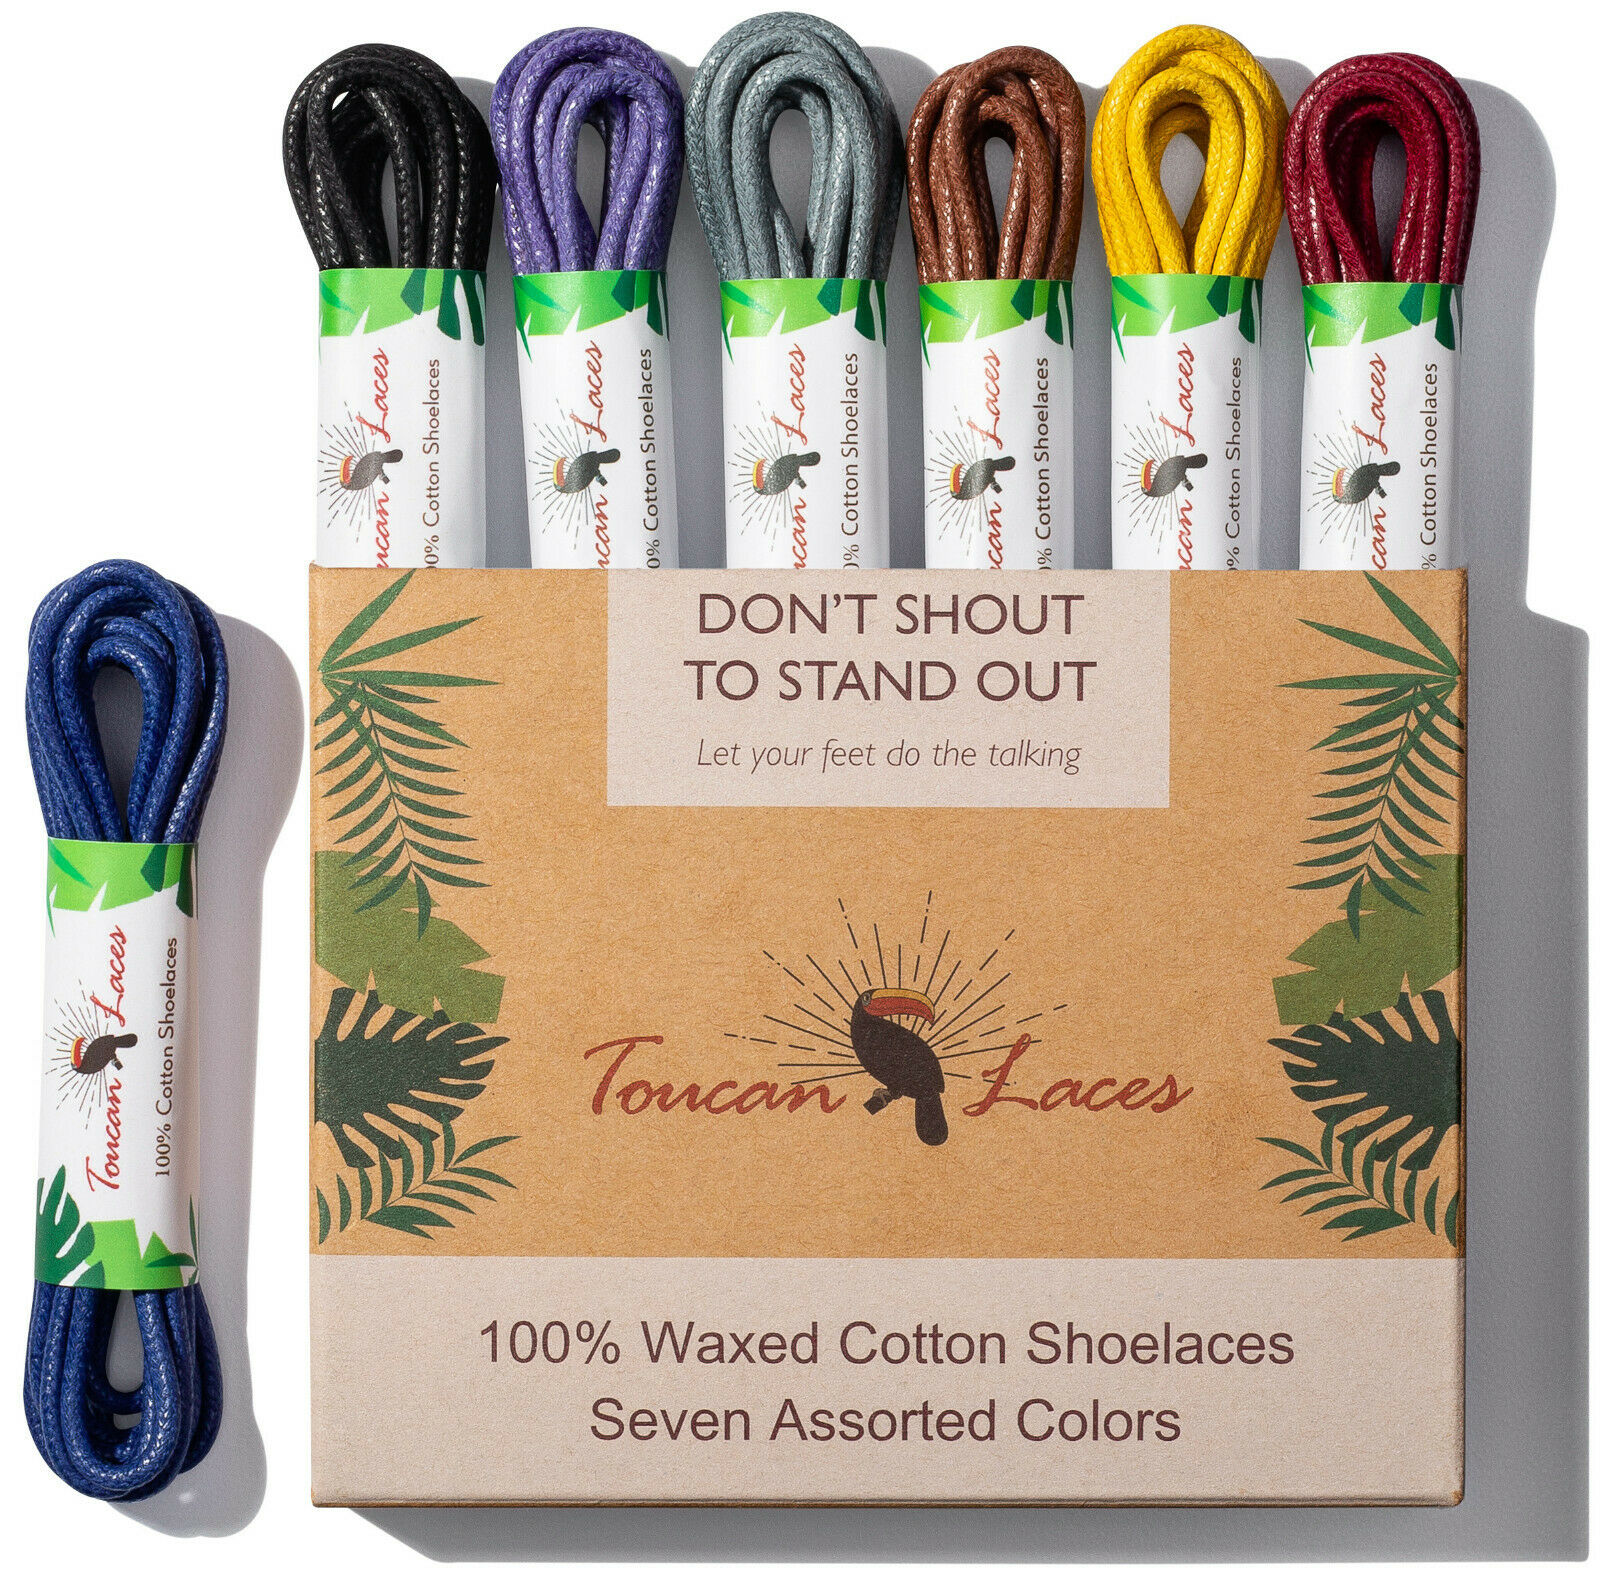 Dress Shoe Laces Waxed - 7 Colorful Pairs of Round 100% Premium Cotton Shoelace